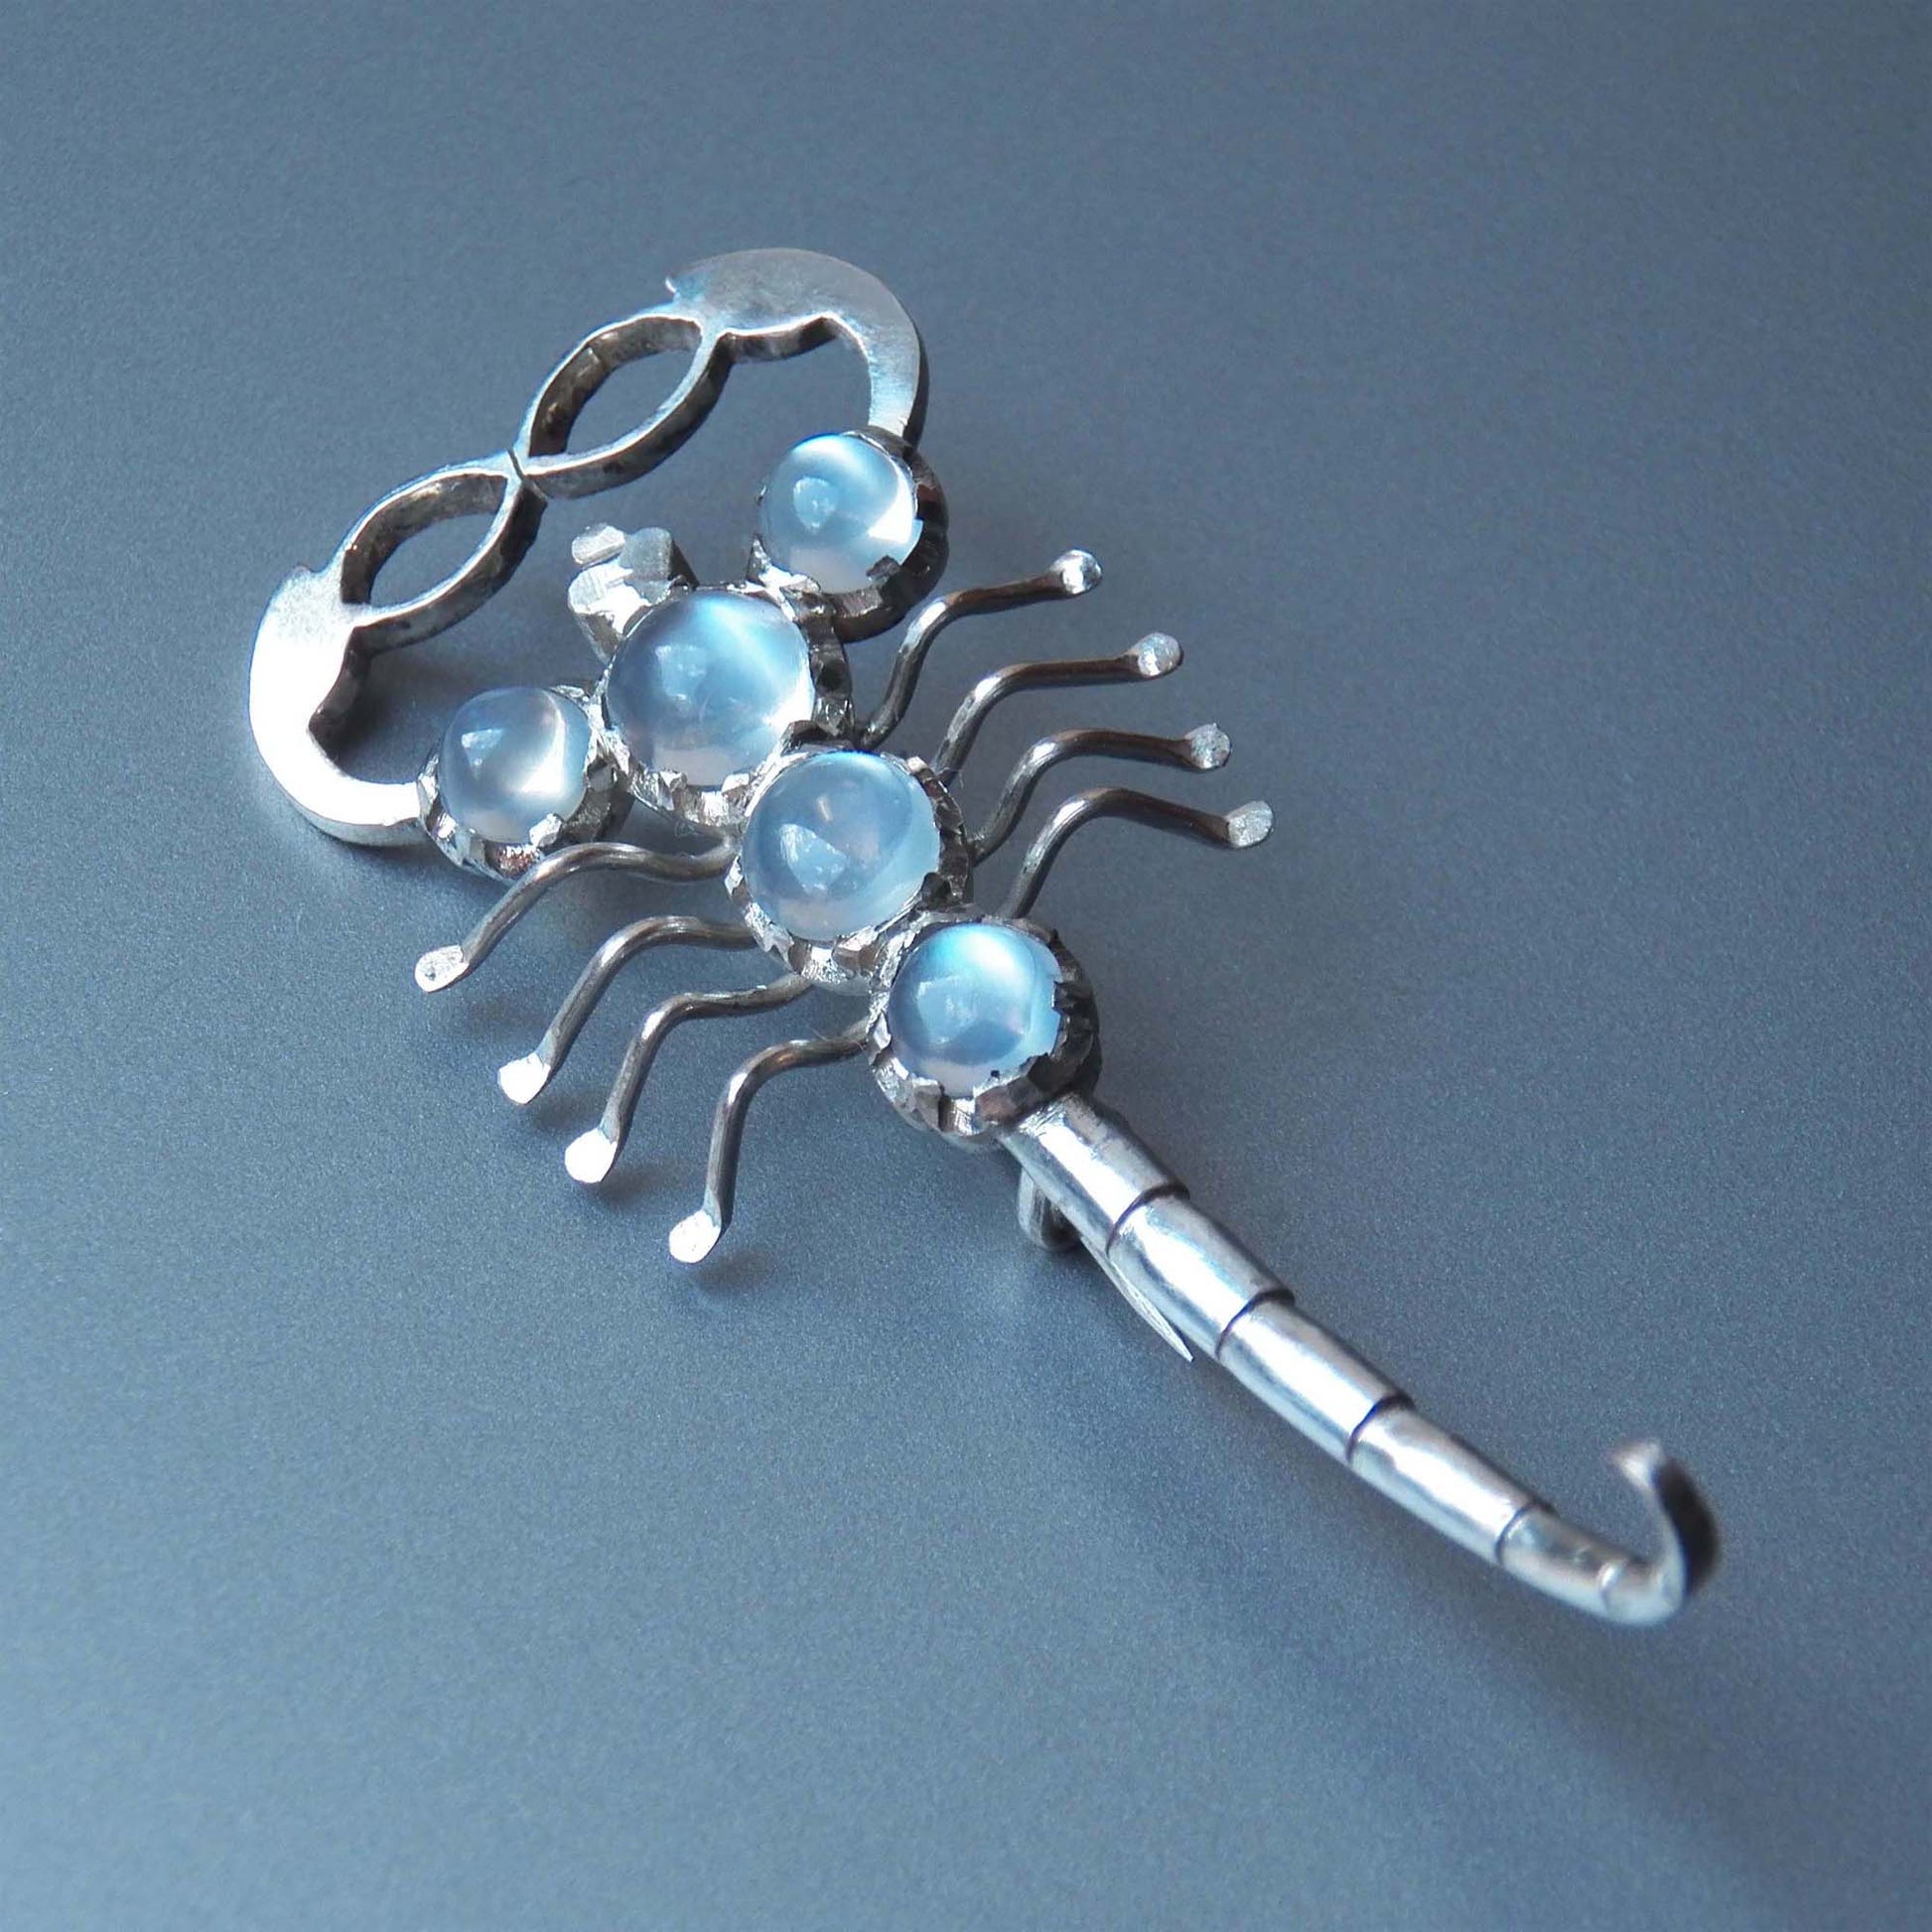 Victorian scorpion brooch with moonstones, 1800s jewelry